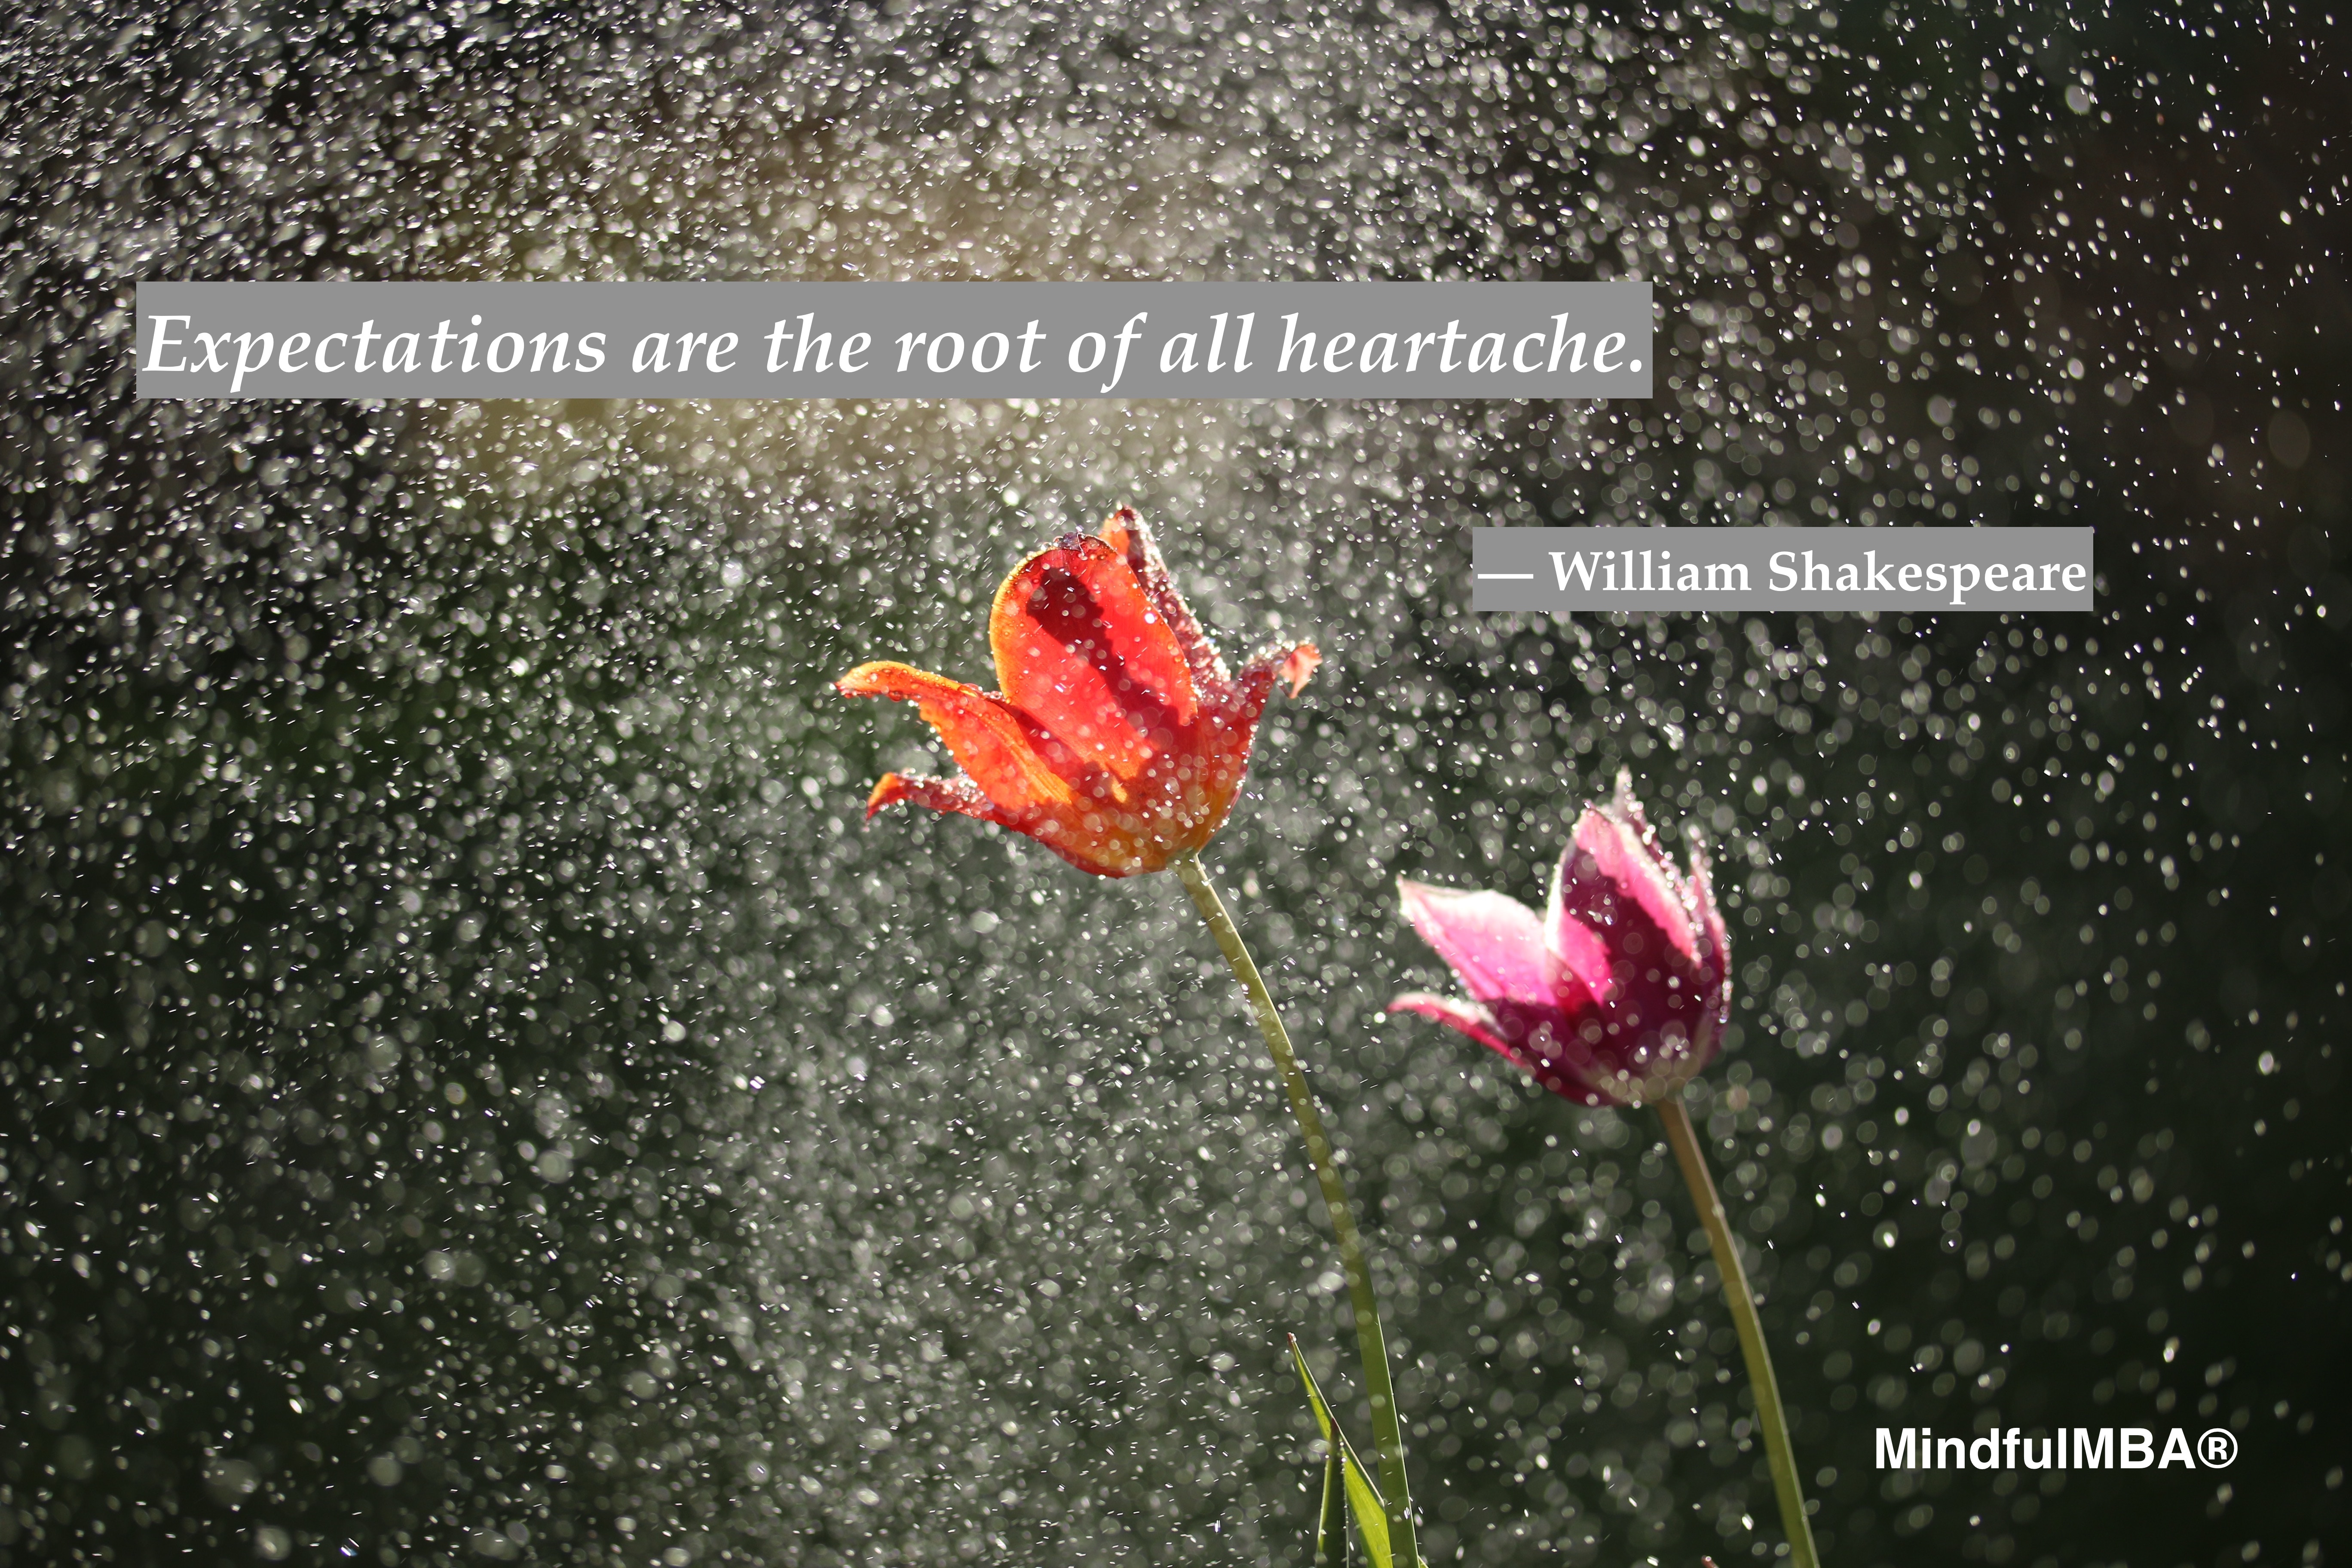 Shakespeare_Expectations quote w tag (Michael Podger)